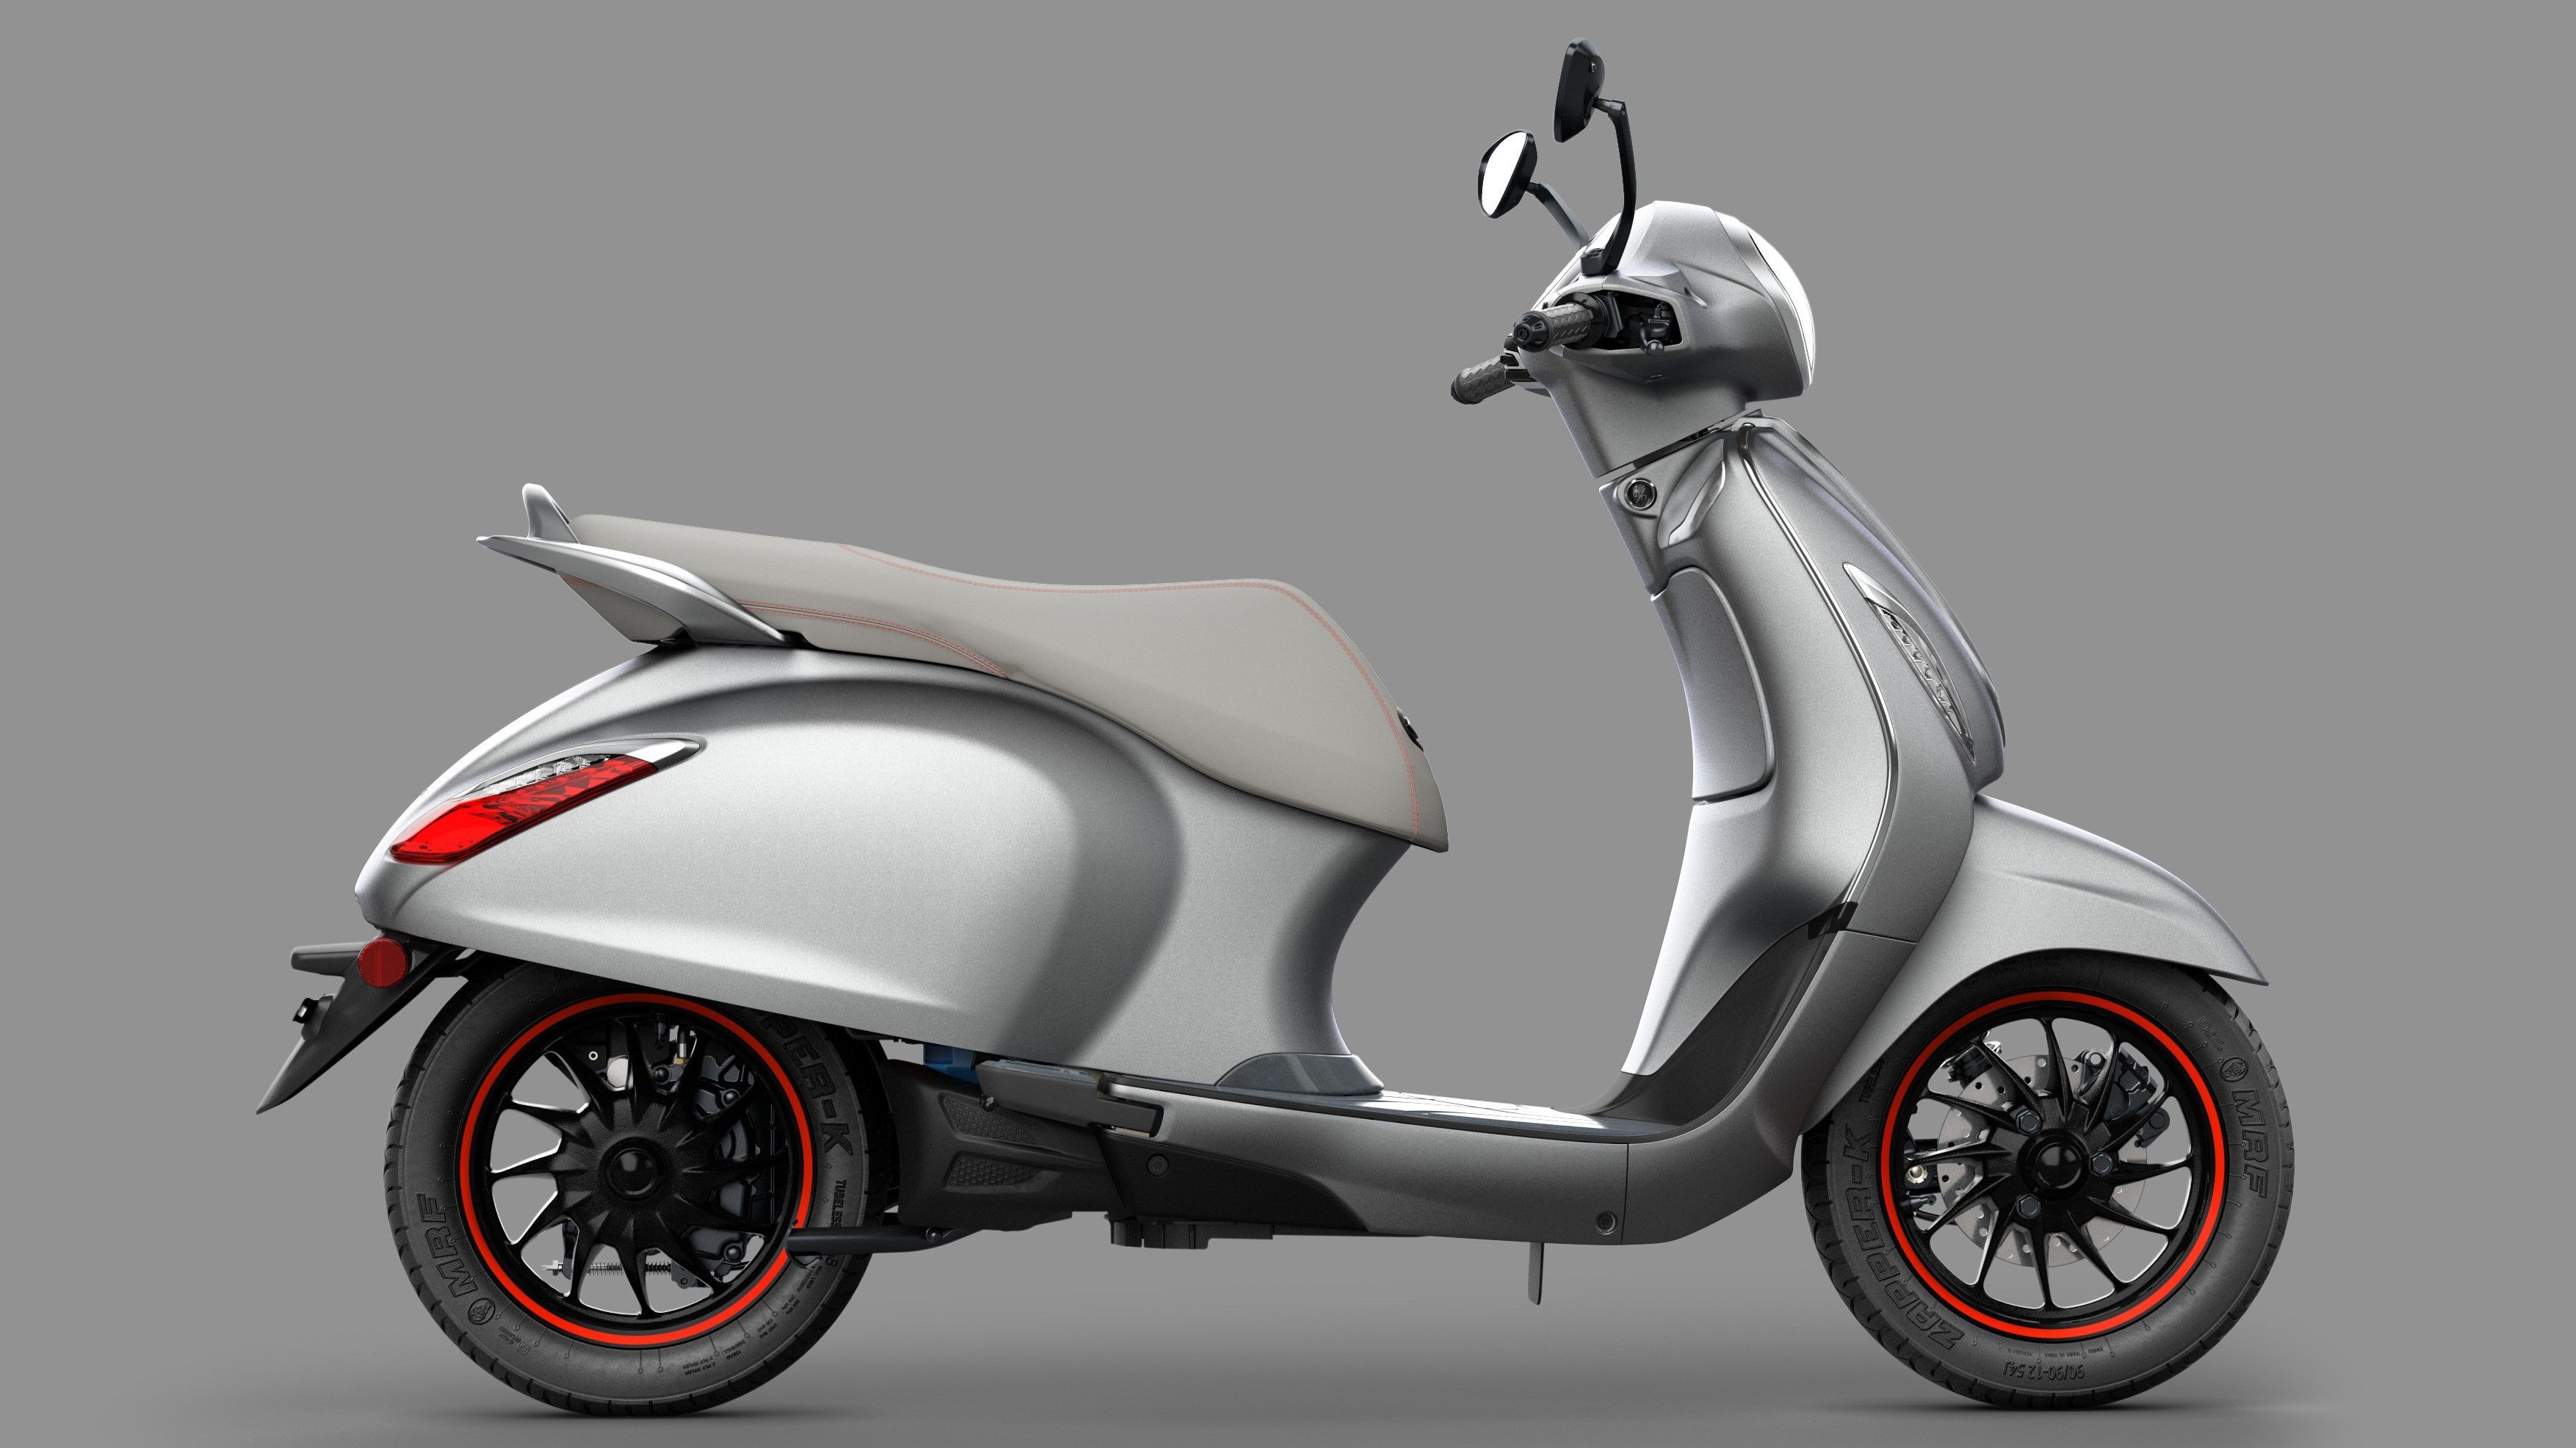 Bajaj enters the electric scooter segment with the new Chetak